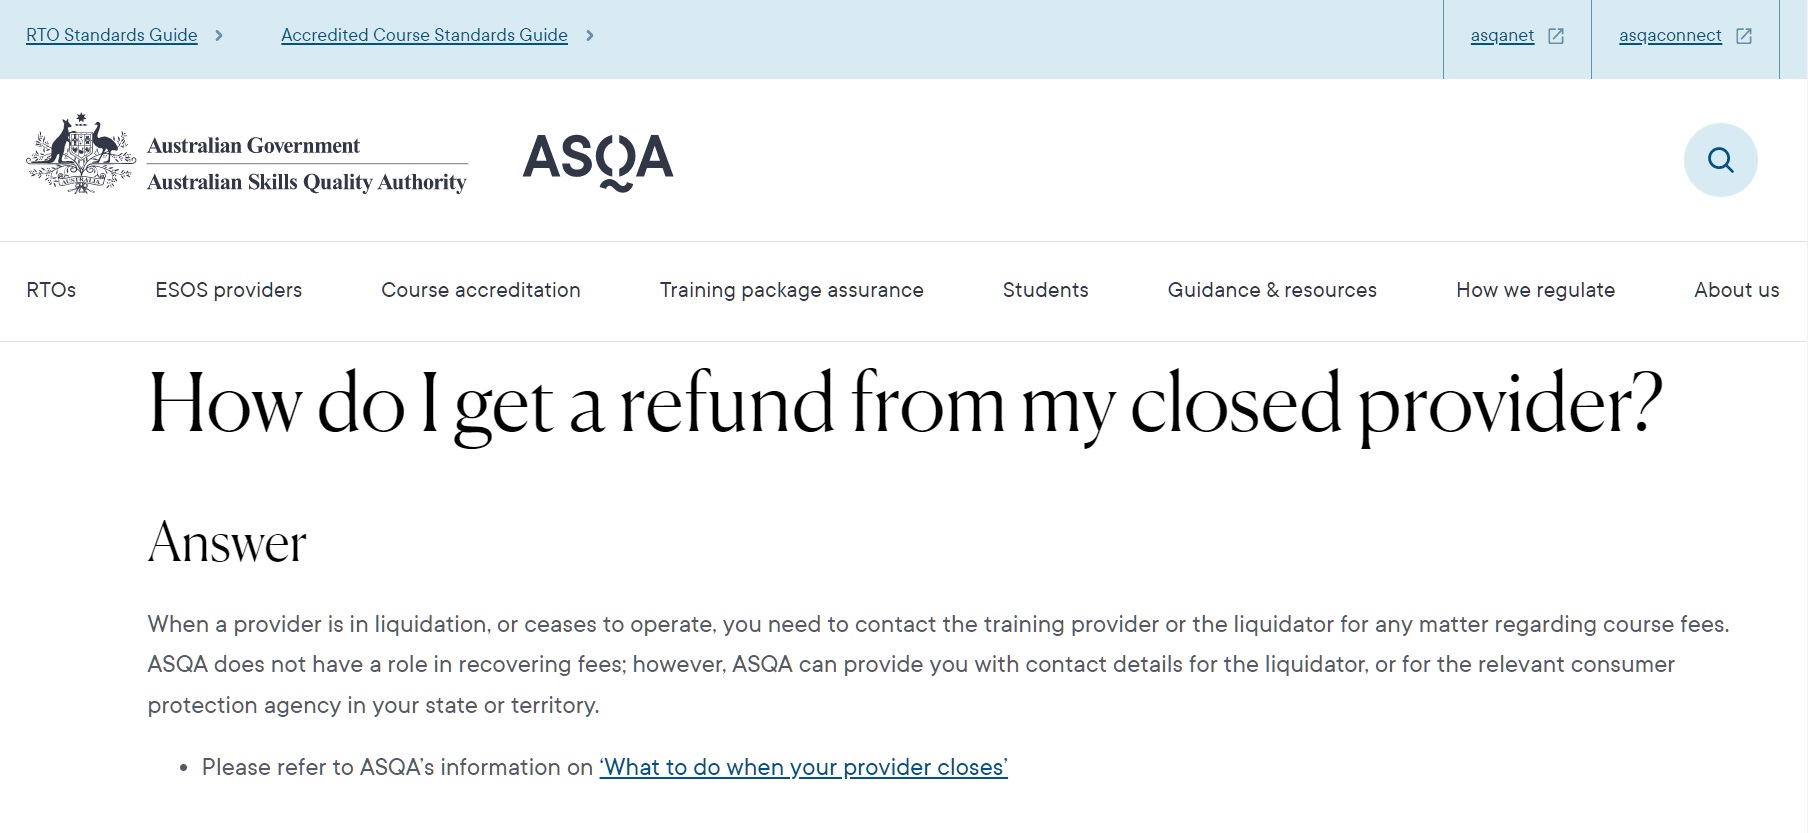 ASQA-How-to-get-a-refund-from-a-Registered-Training-Organisation-like-Mentor-Education-or-Open-Colleges-if-they-go-out-of-business-EzyLearn-MYOB-Xero-Courses